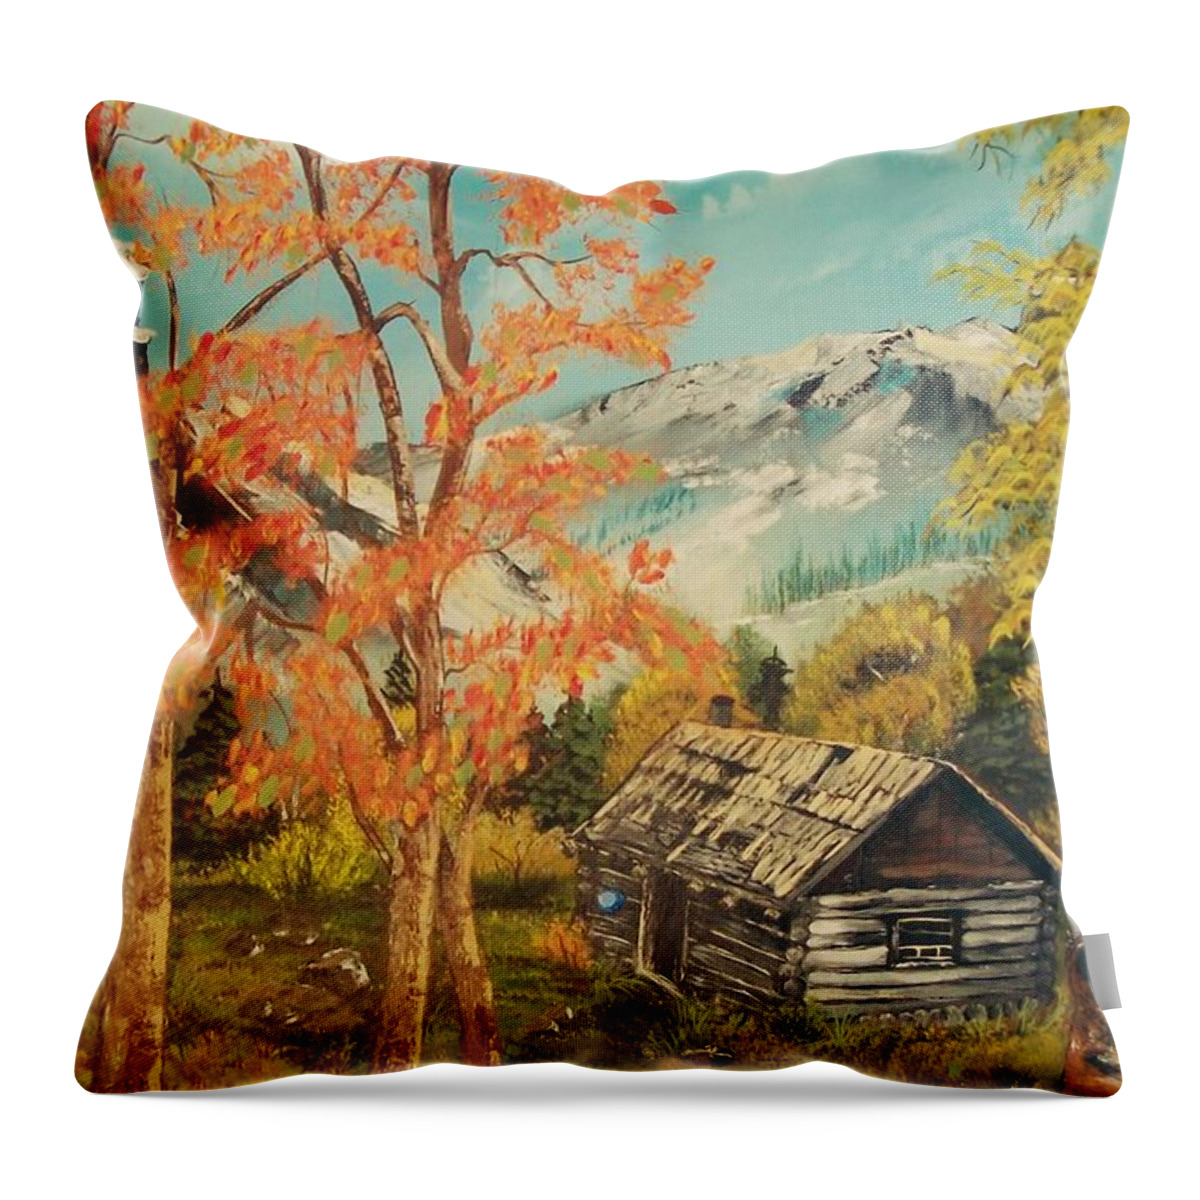 Autumn Throw Pillow featuring the painting Autumn Memories by Sharon Duguay